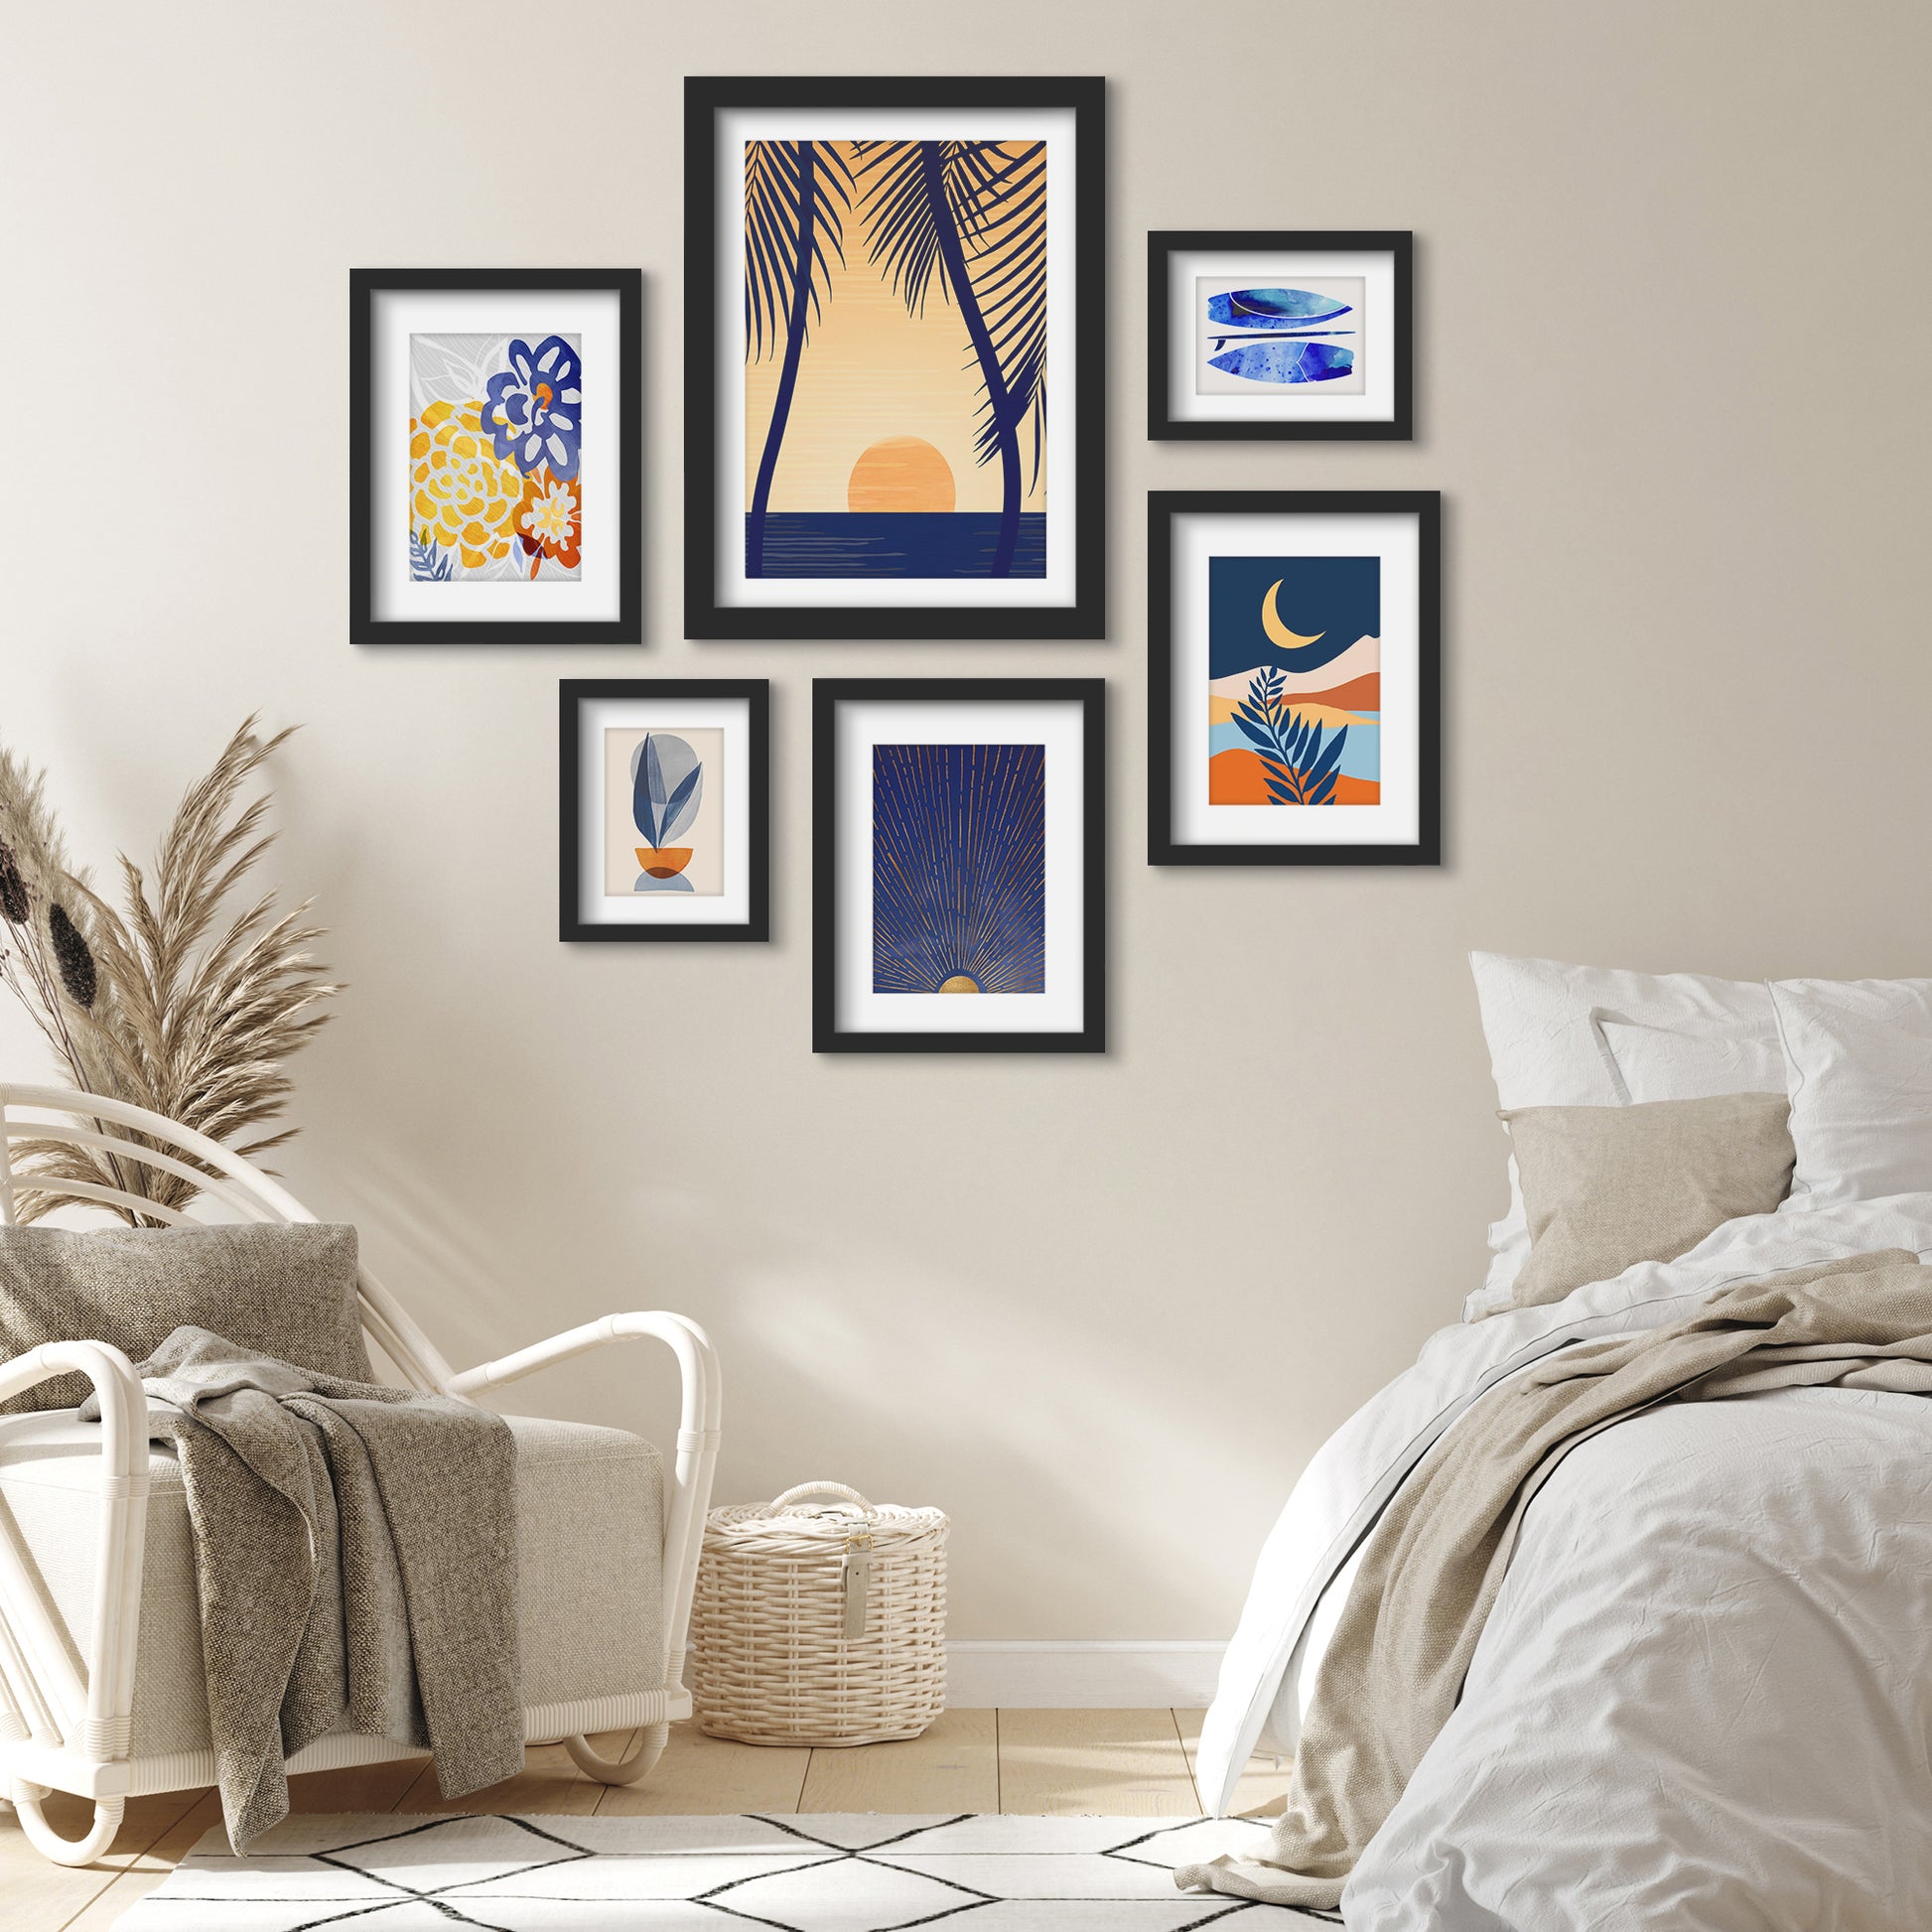 Golden Sunset With Palms - 6 Piece Framed Gallery Wall Set - Americanflat